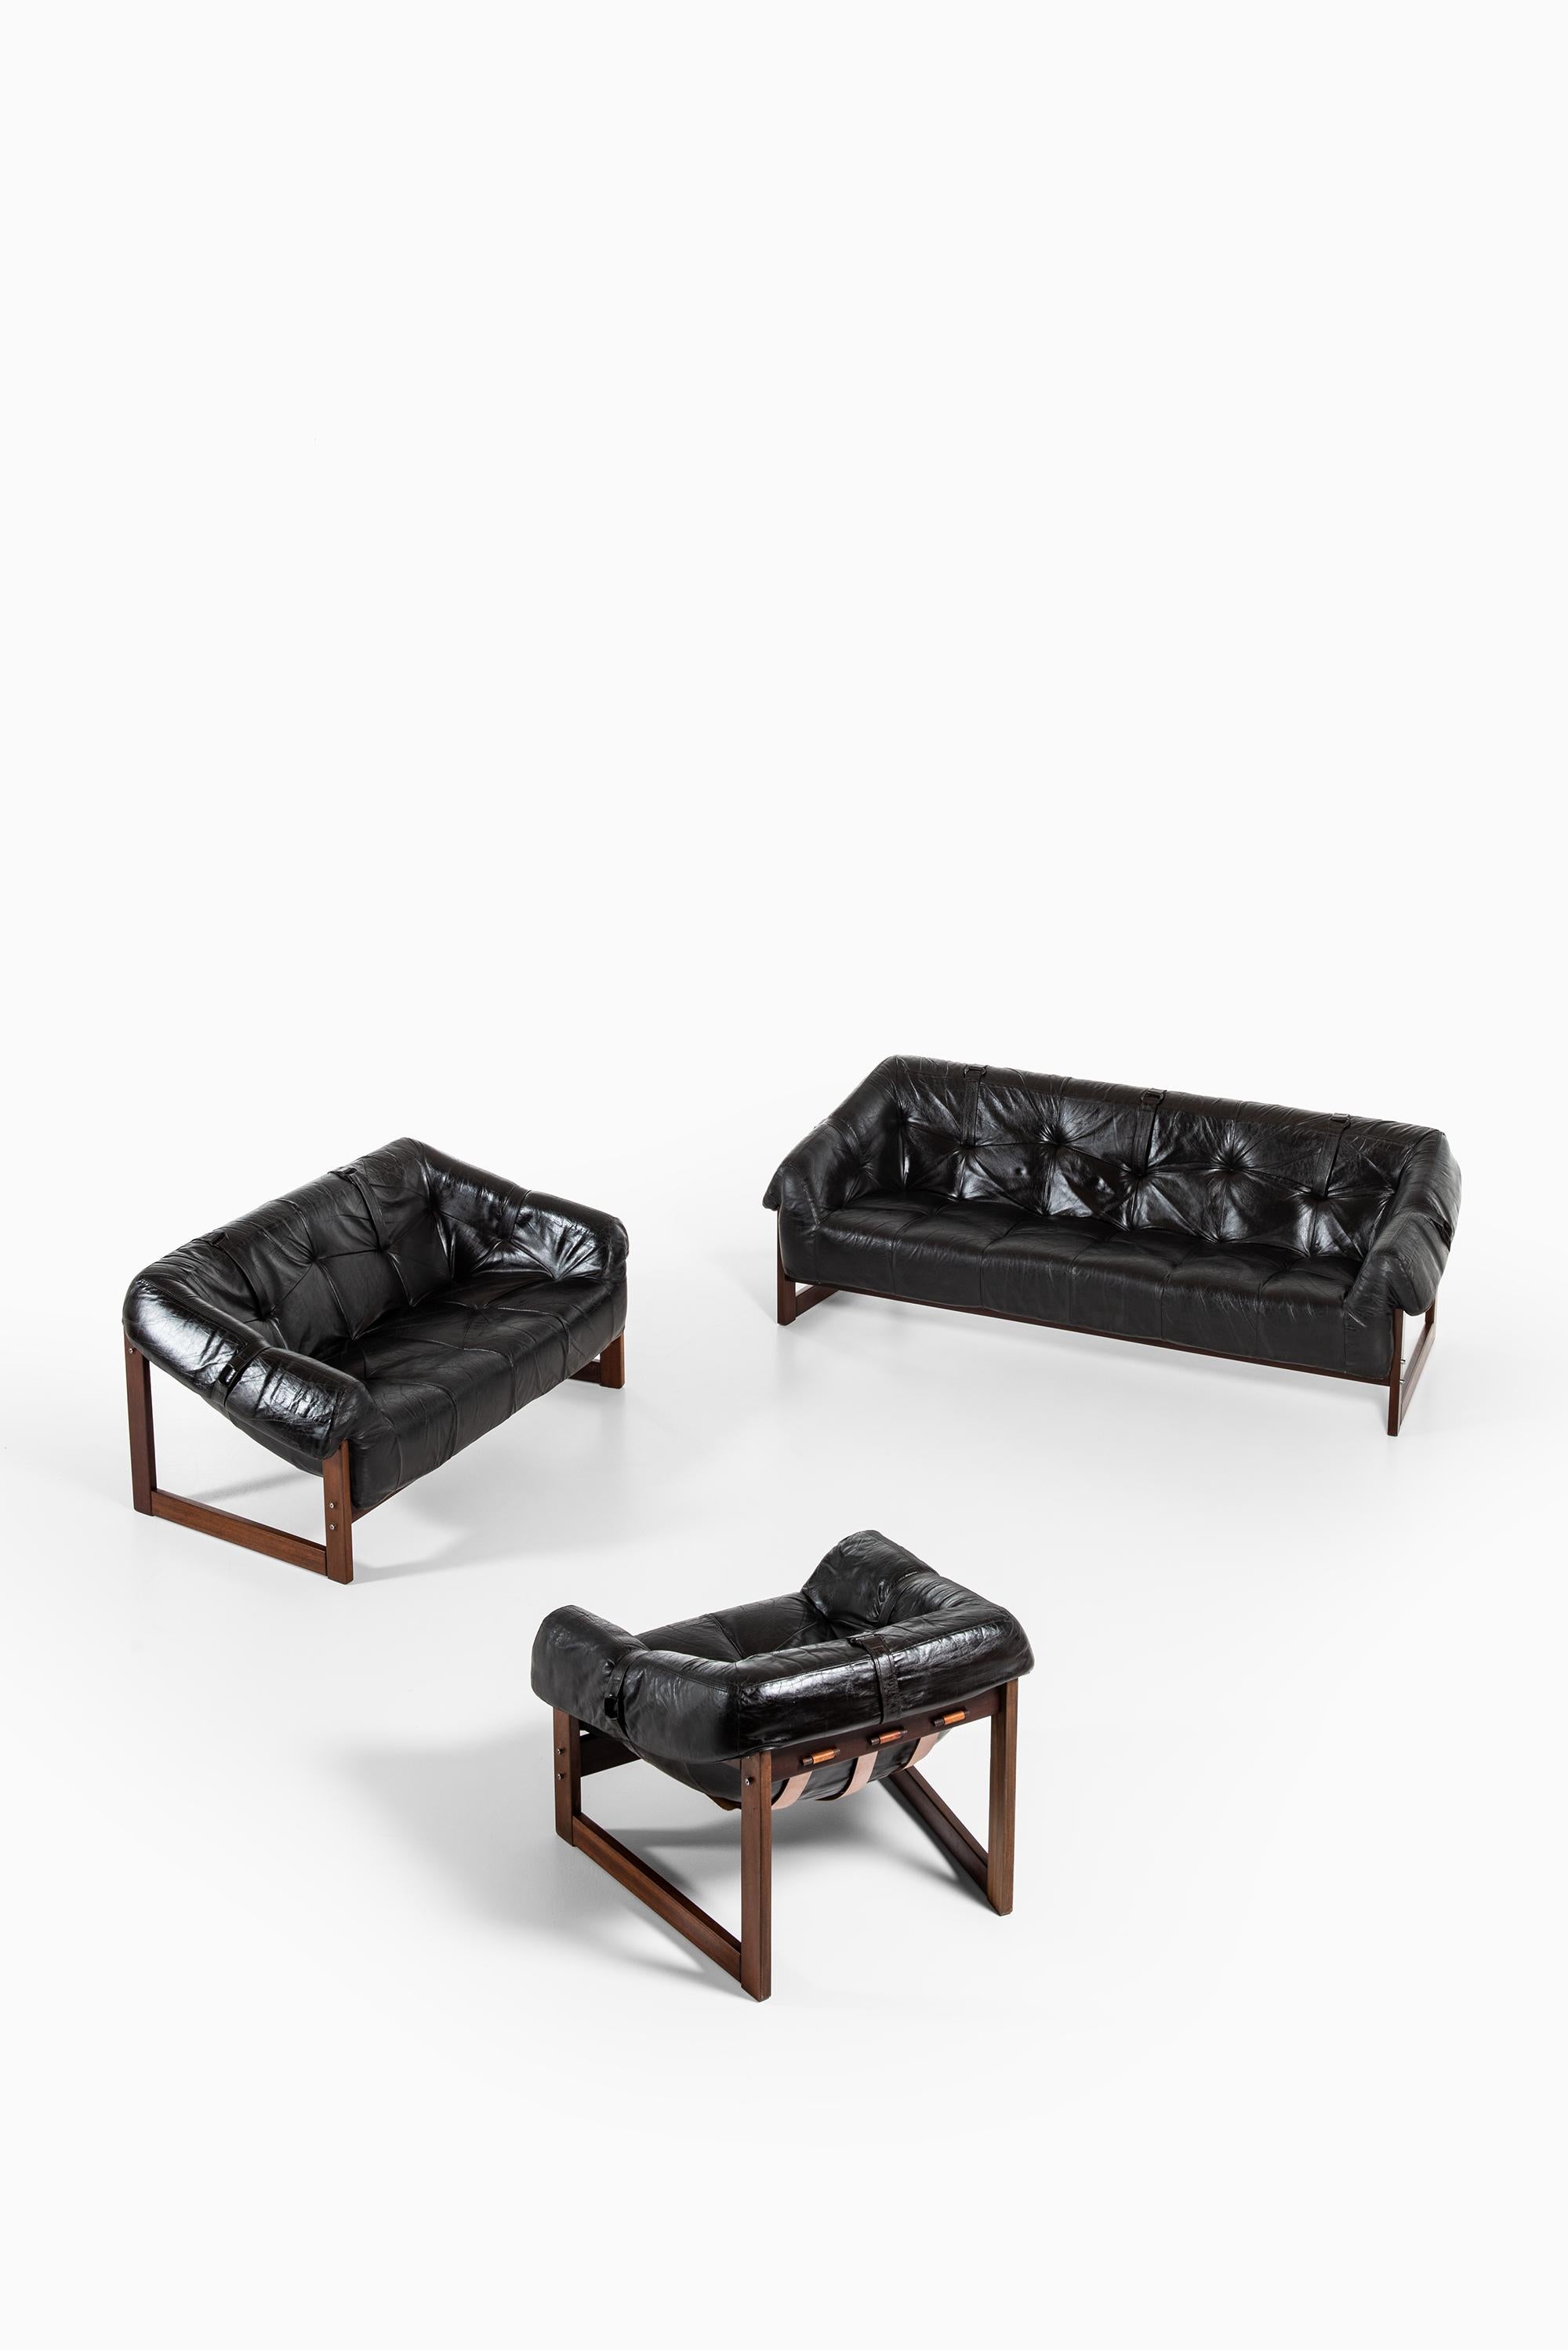 Mid-20th Century Percival Lafer Sofa Model MP-091 Produced by Lafer MP in Brazil